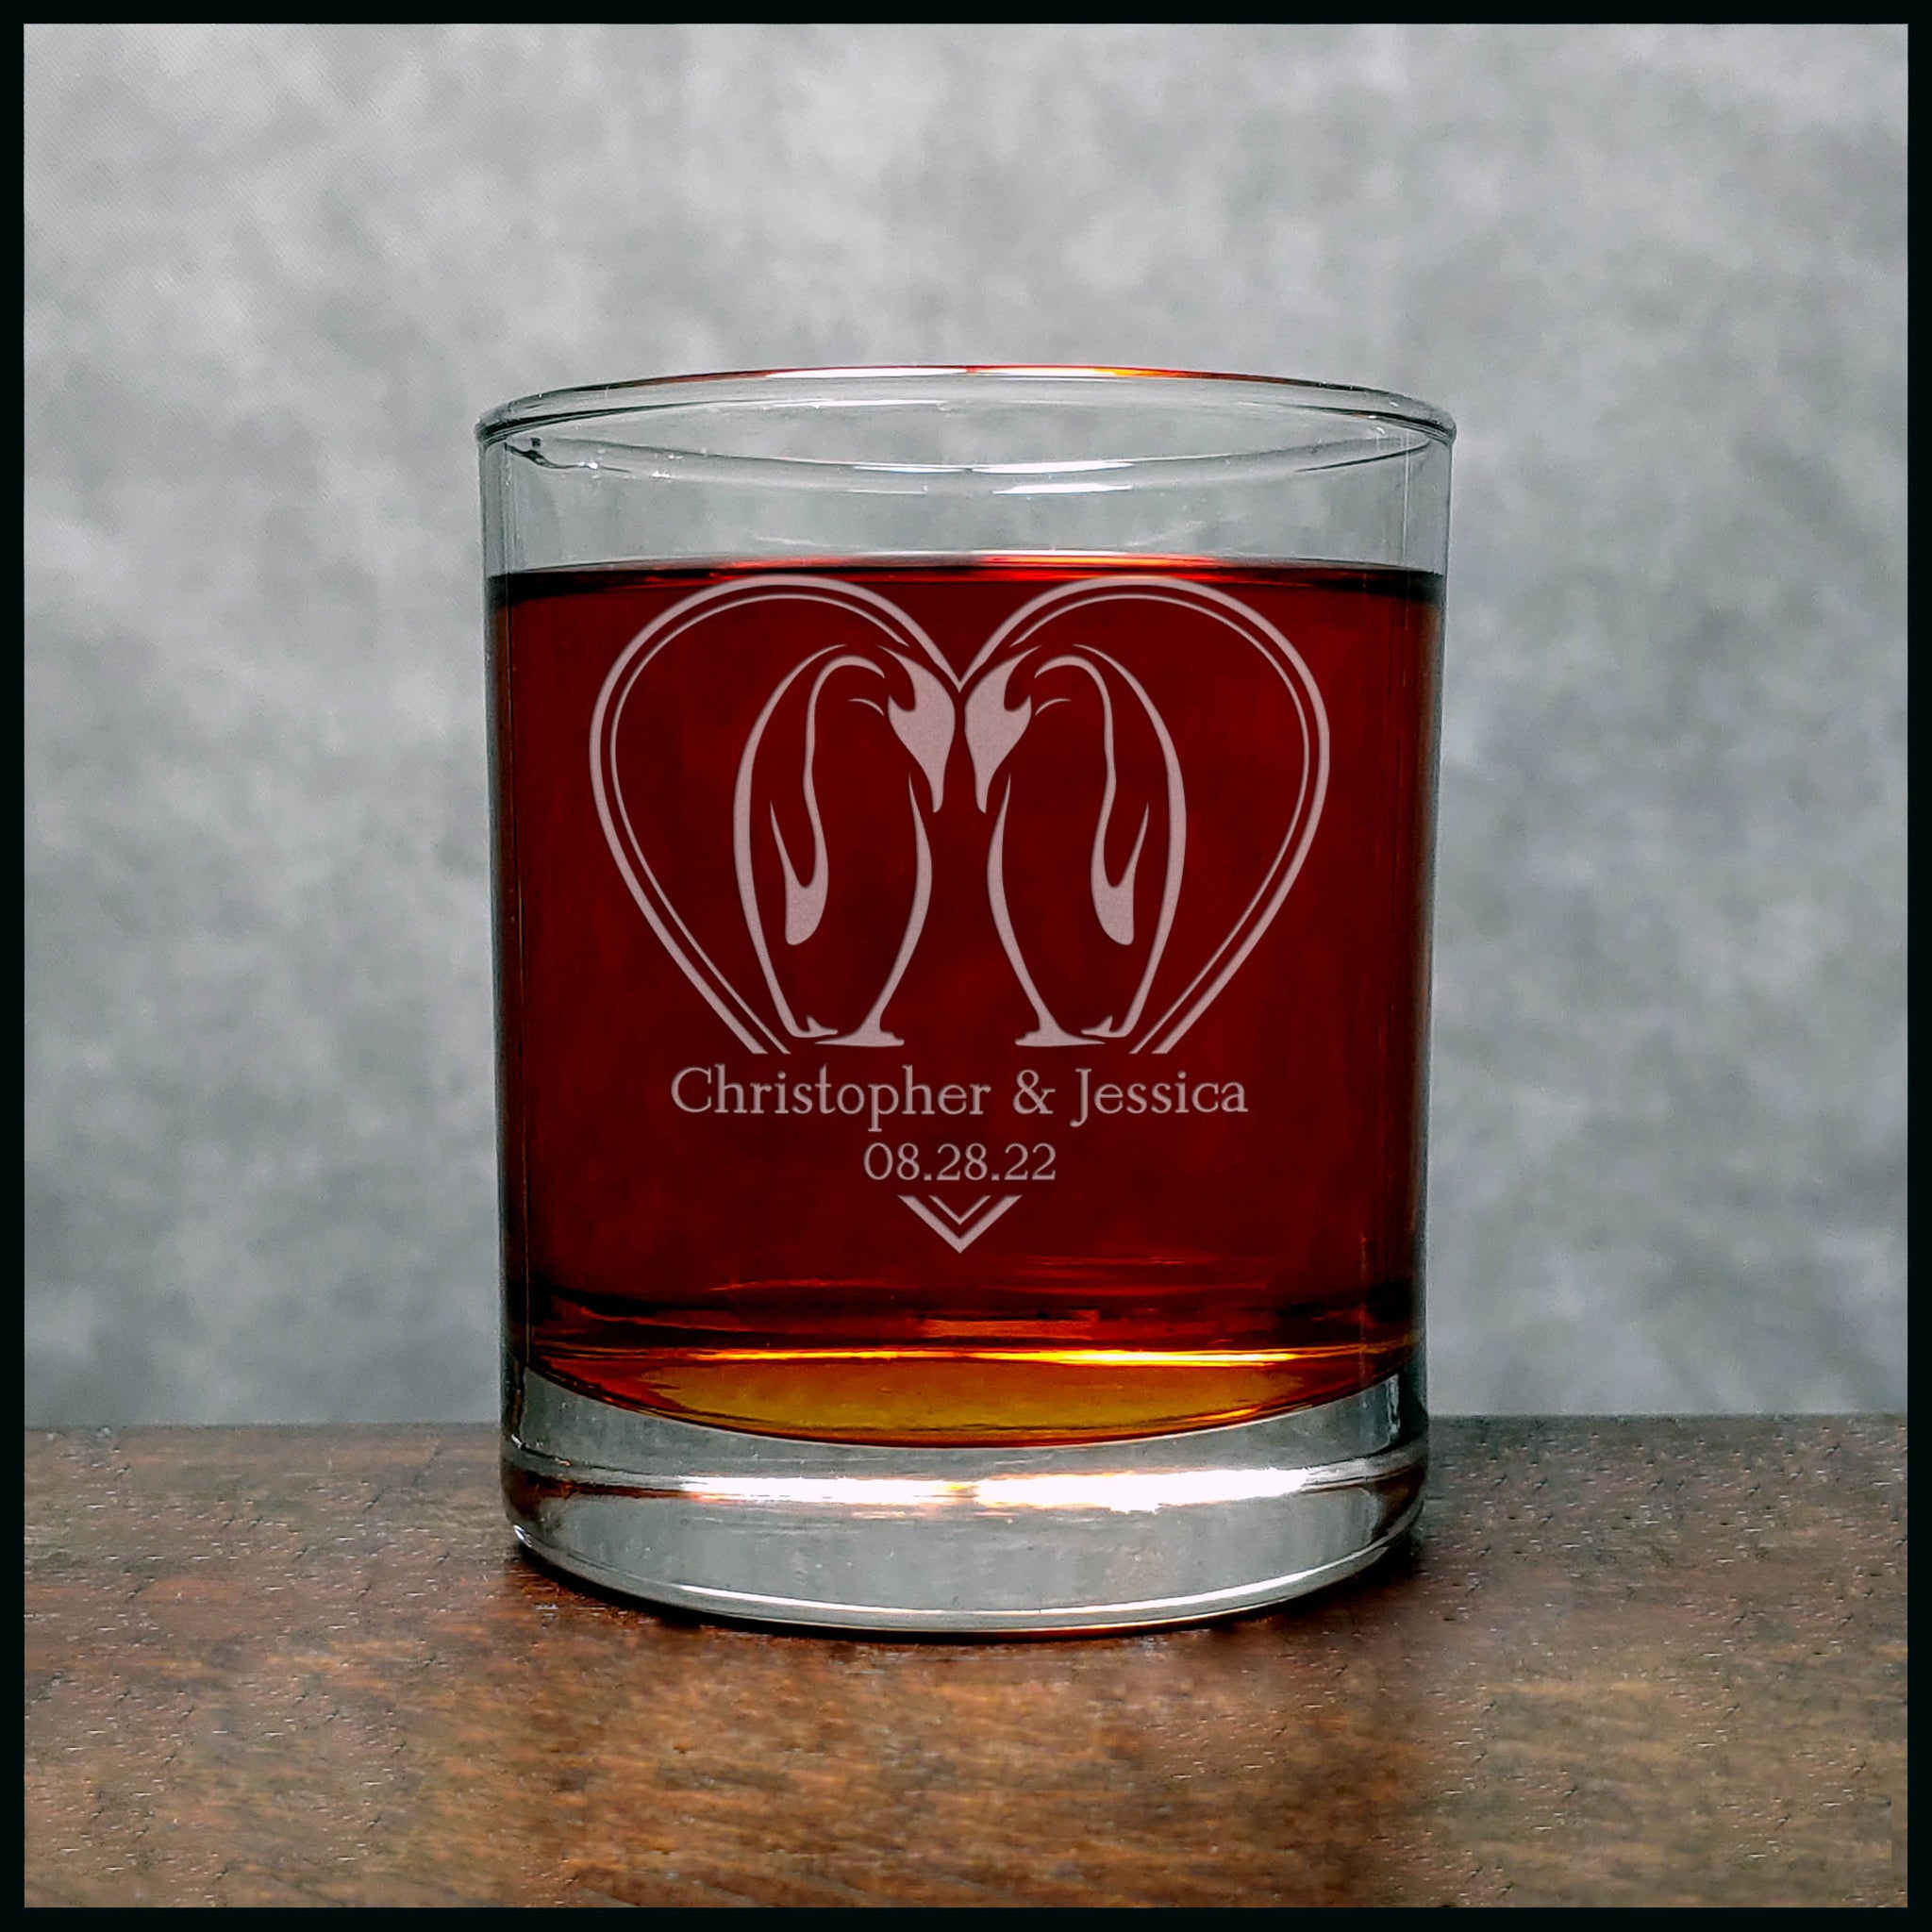 Personalized Penguin Whisky Glass - Copyright Hues in Glass